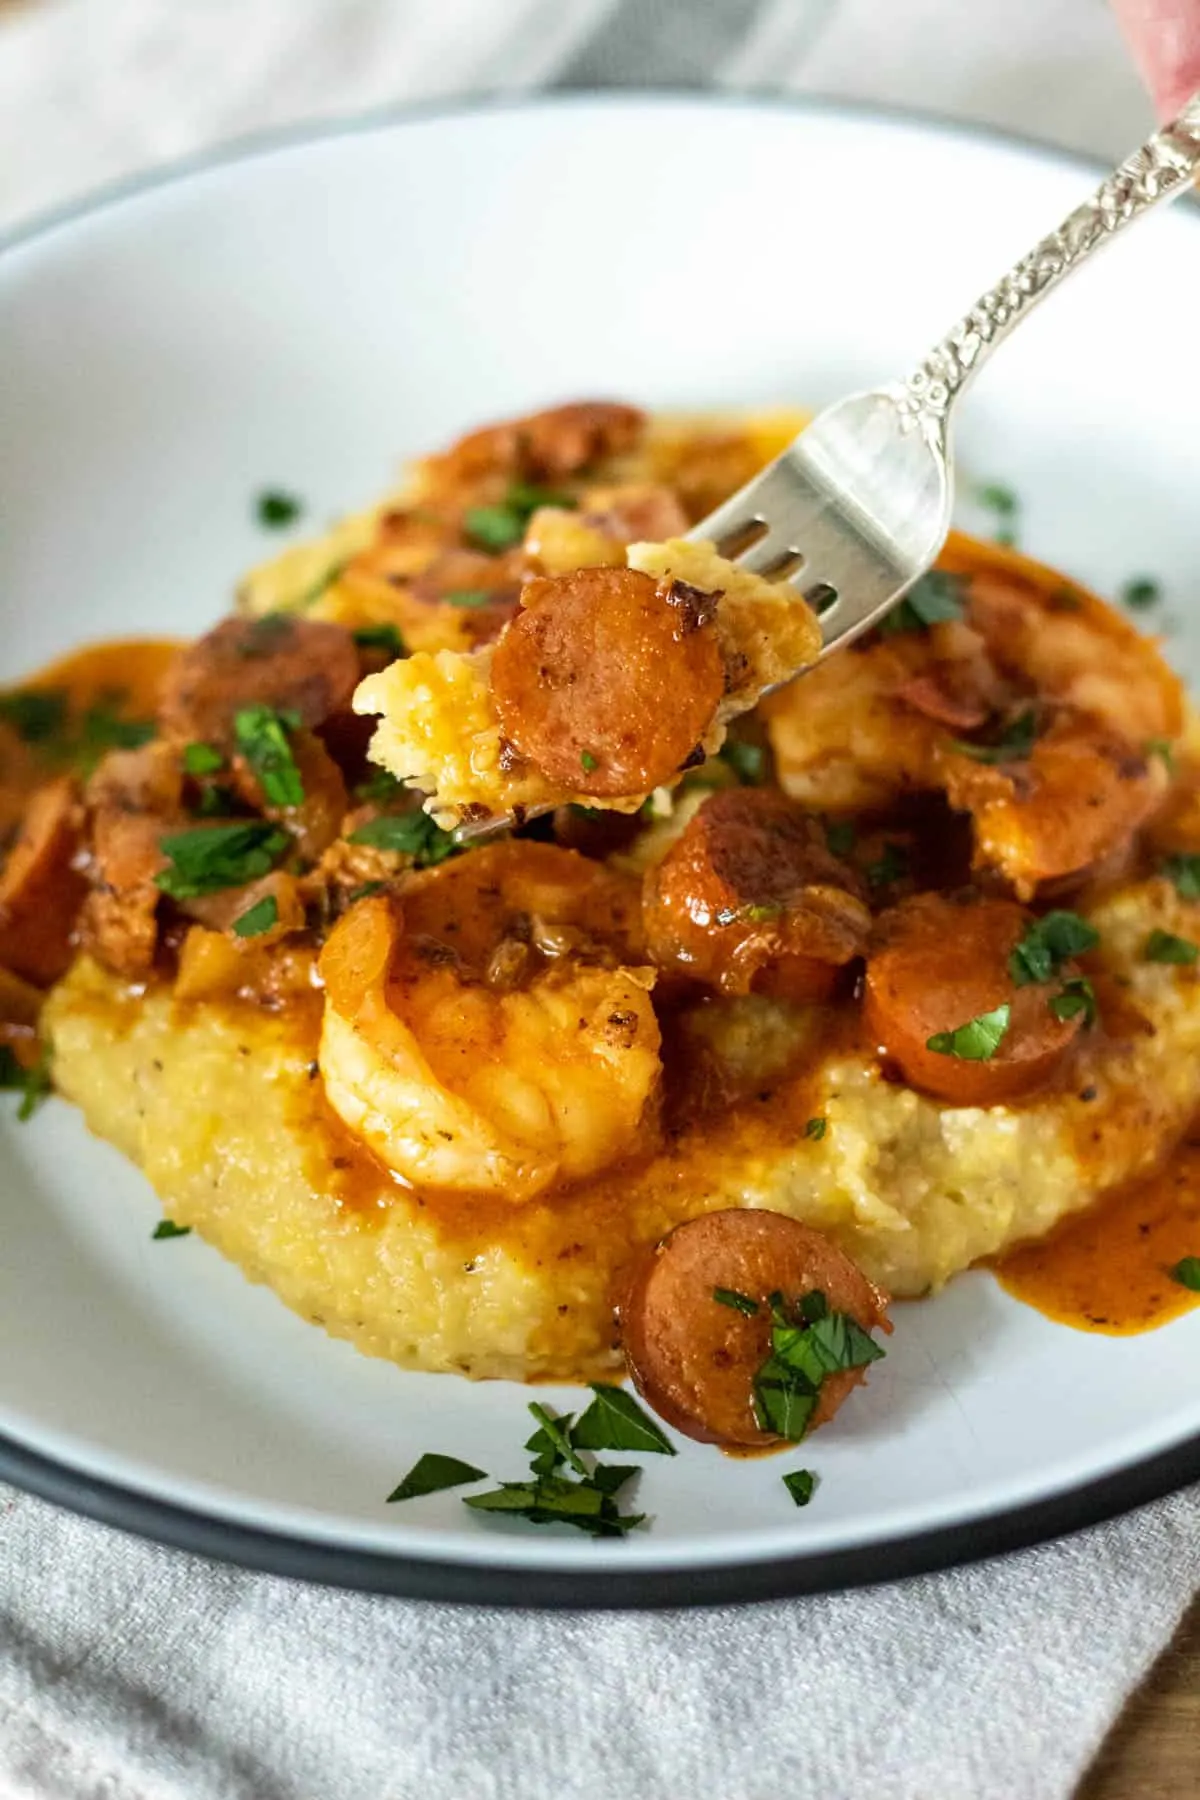 Shrimp and grits on plate with forkful of sausage and grits.